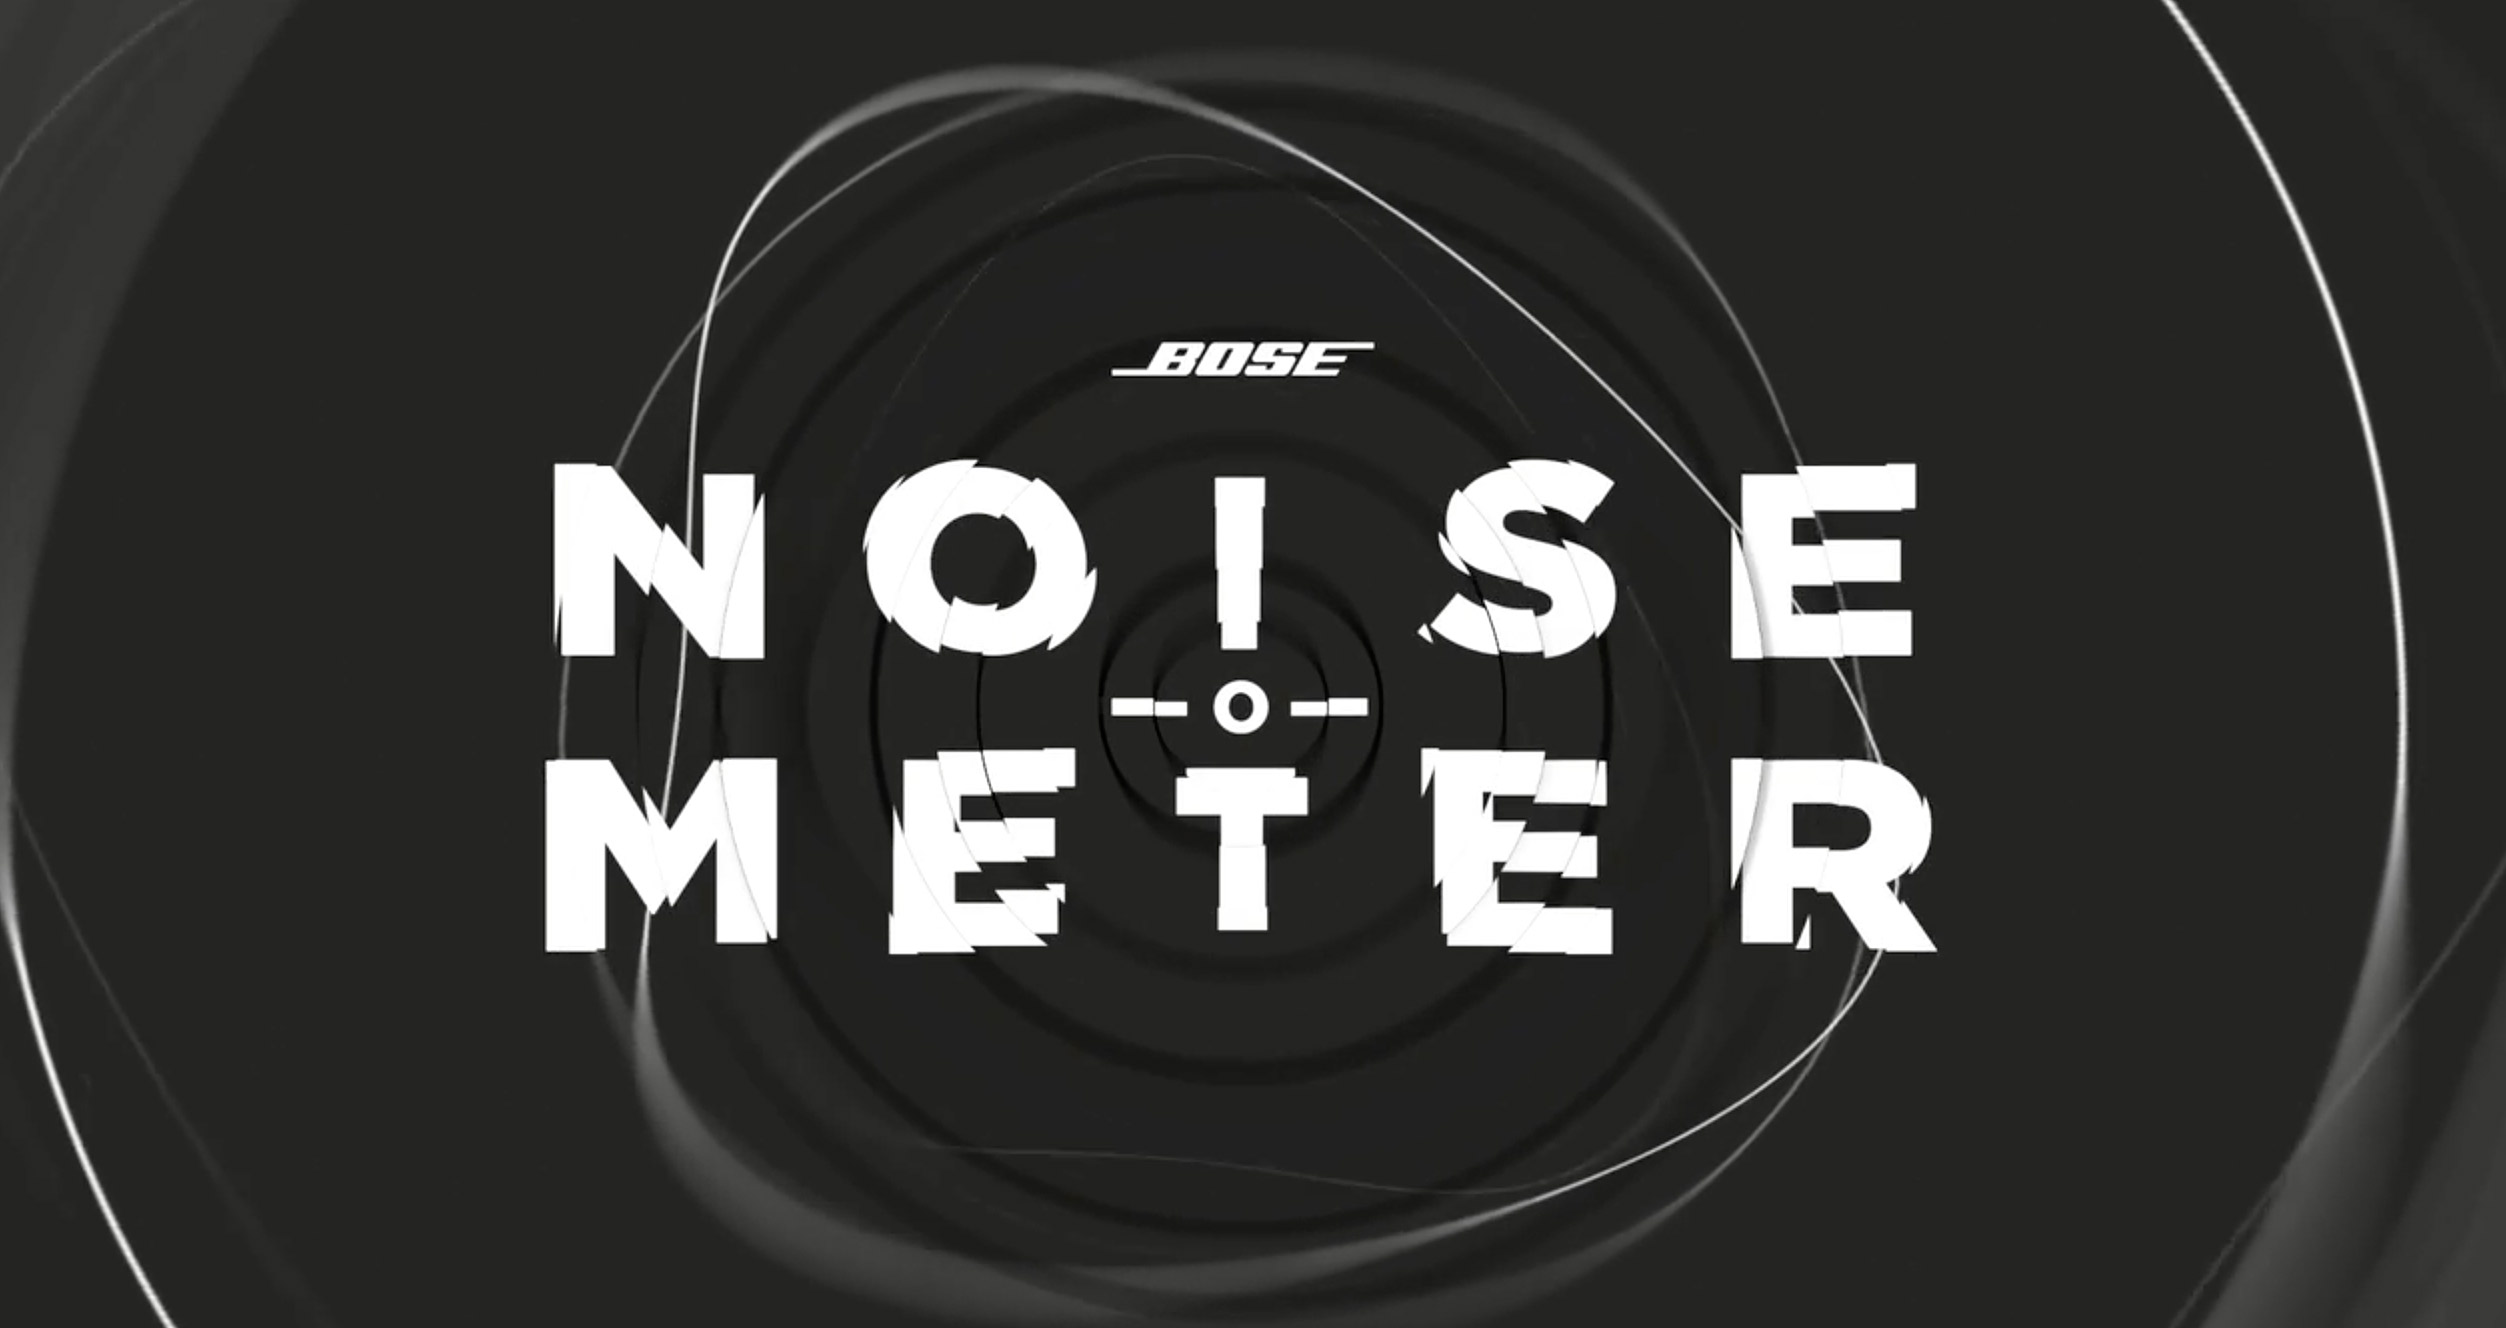 Noise-O-Meter by Bose